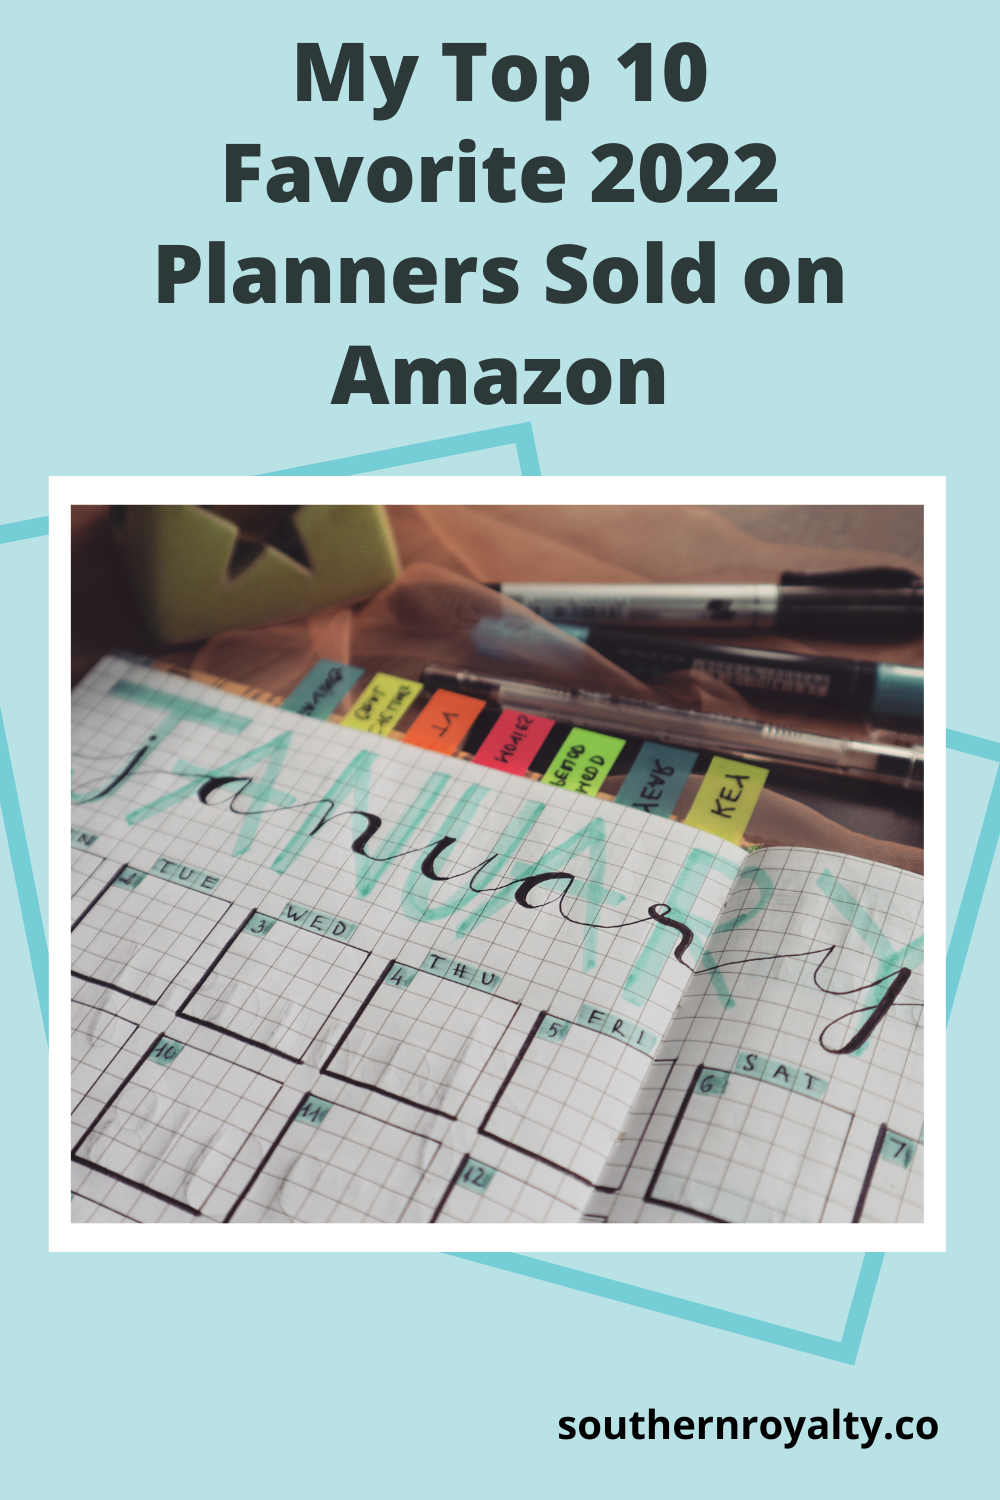 top 10 favorite 2022 planners sold on Amazon